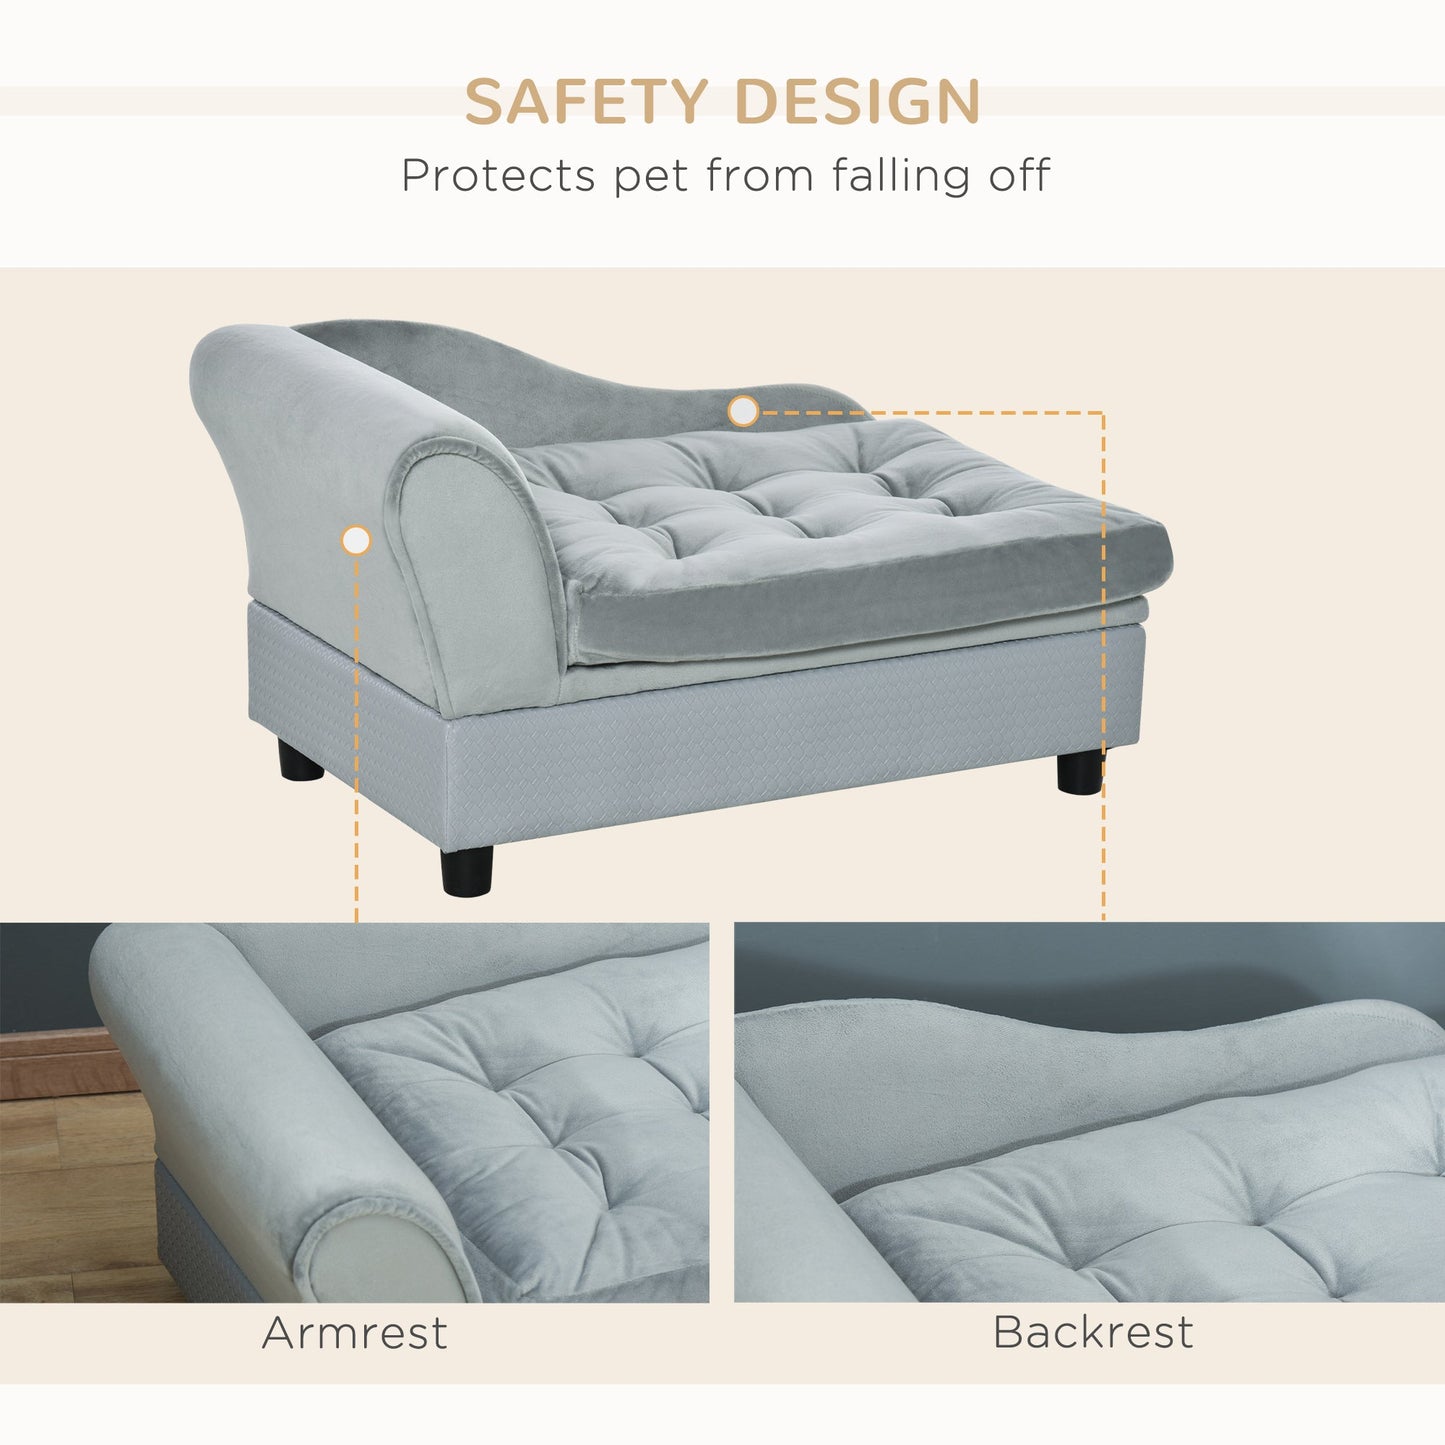 Pet Sofa Dog Couch Chaise Lounge Pet Bed with Storage Function Small Sized Dog Various Cat Sponge Cushioned Bed Lounge, Light Grey - Gallery Canada